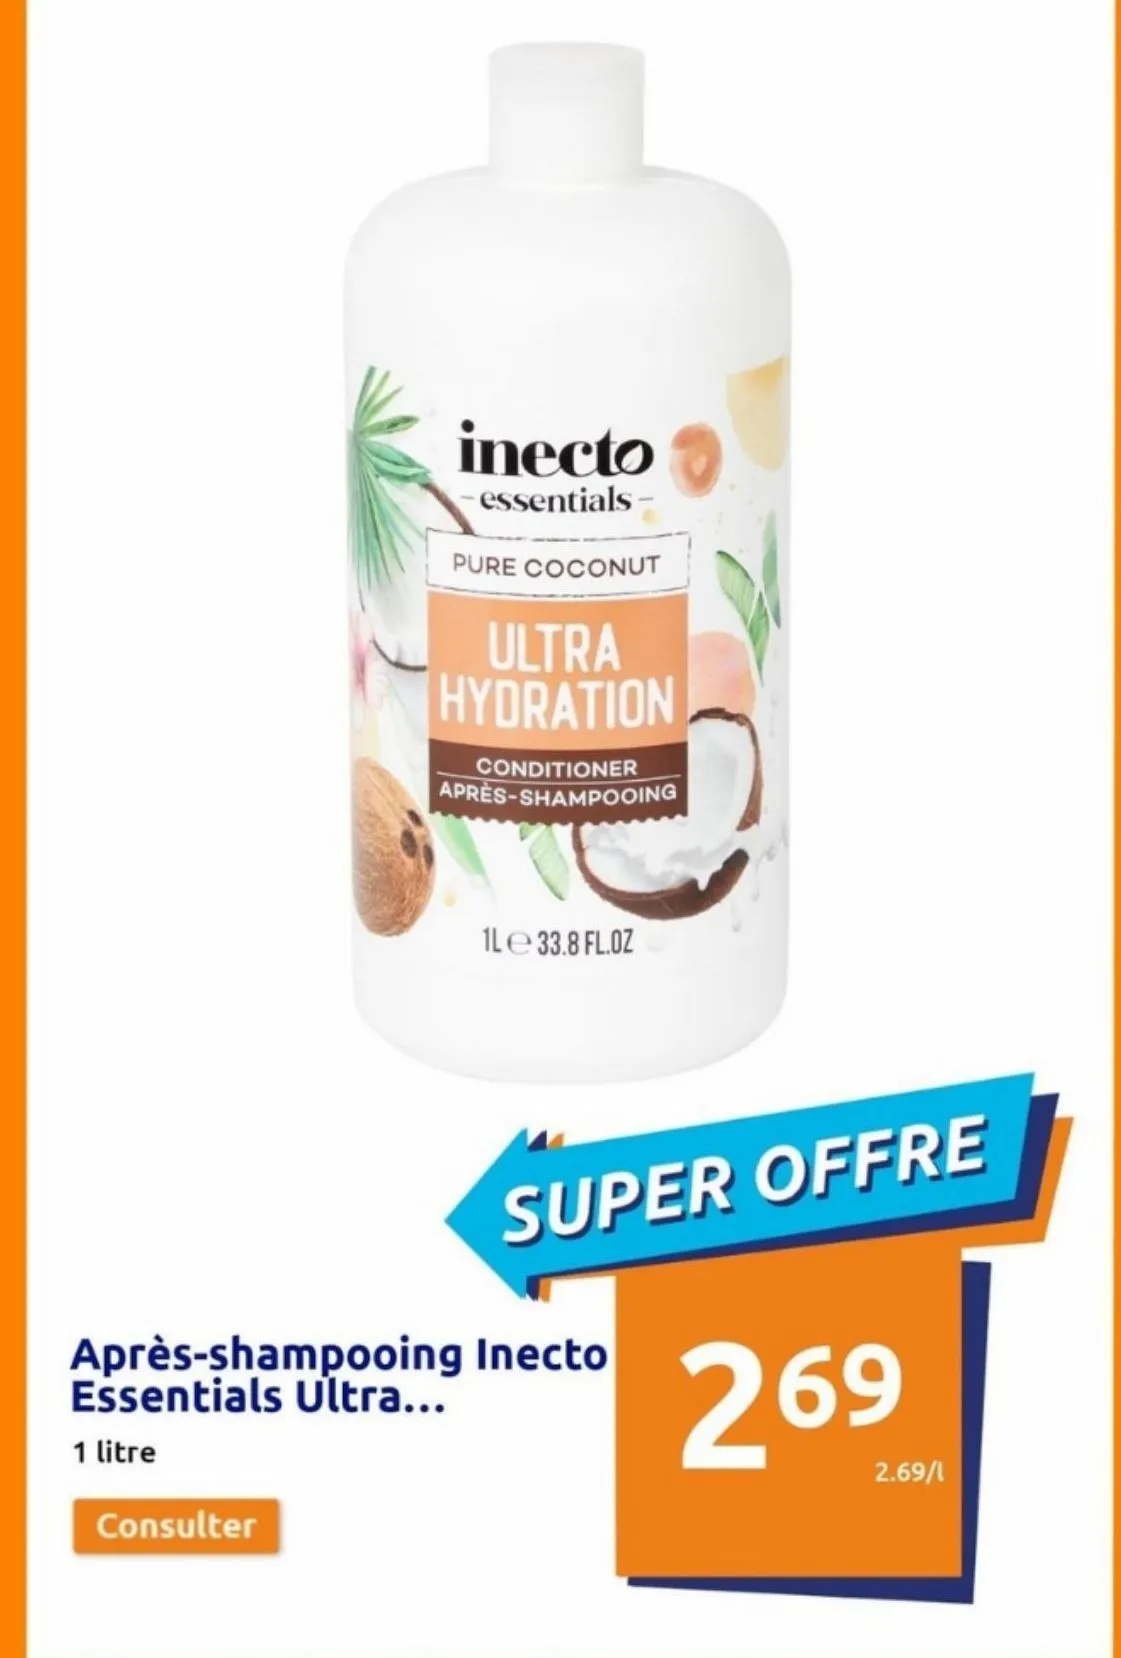 aprés-shampoing inecto essentials ultra